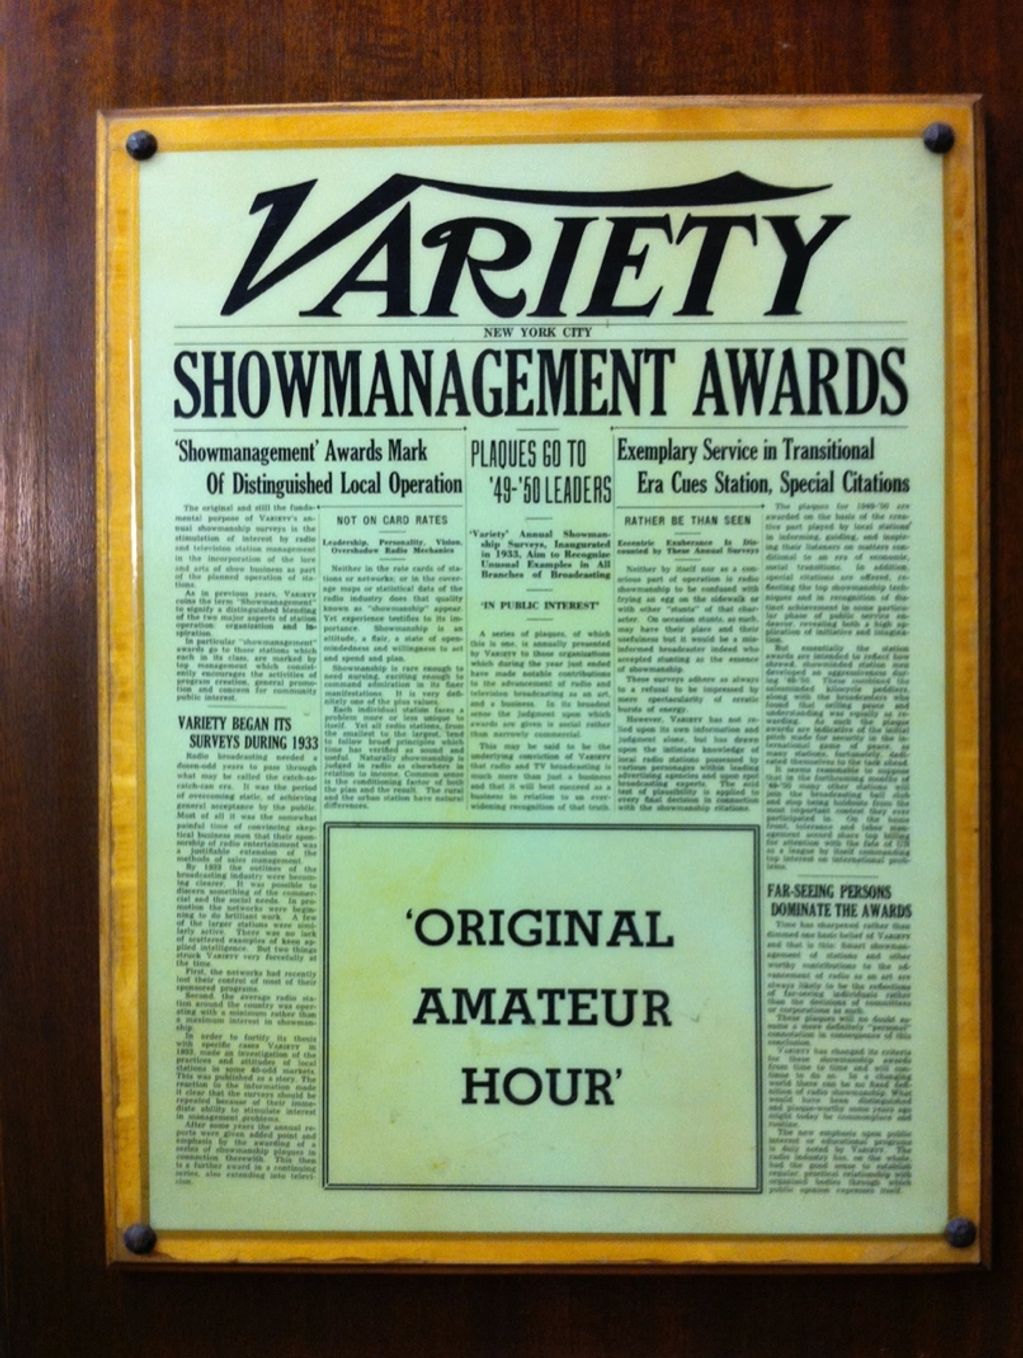 Show business magazine: “Variety” Award 
presented to “The Original Amateur Hour” in 1950
